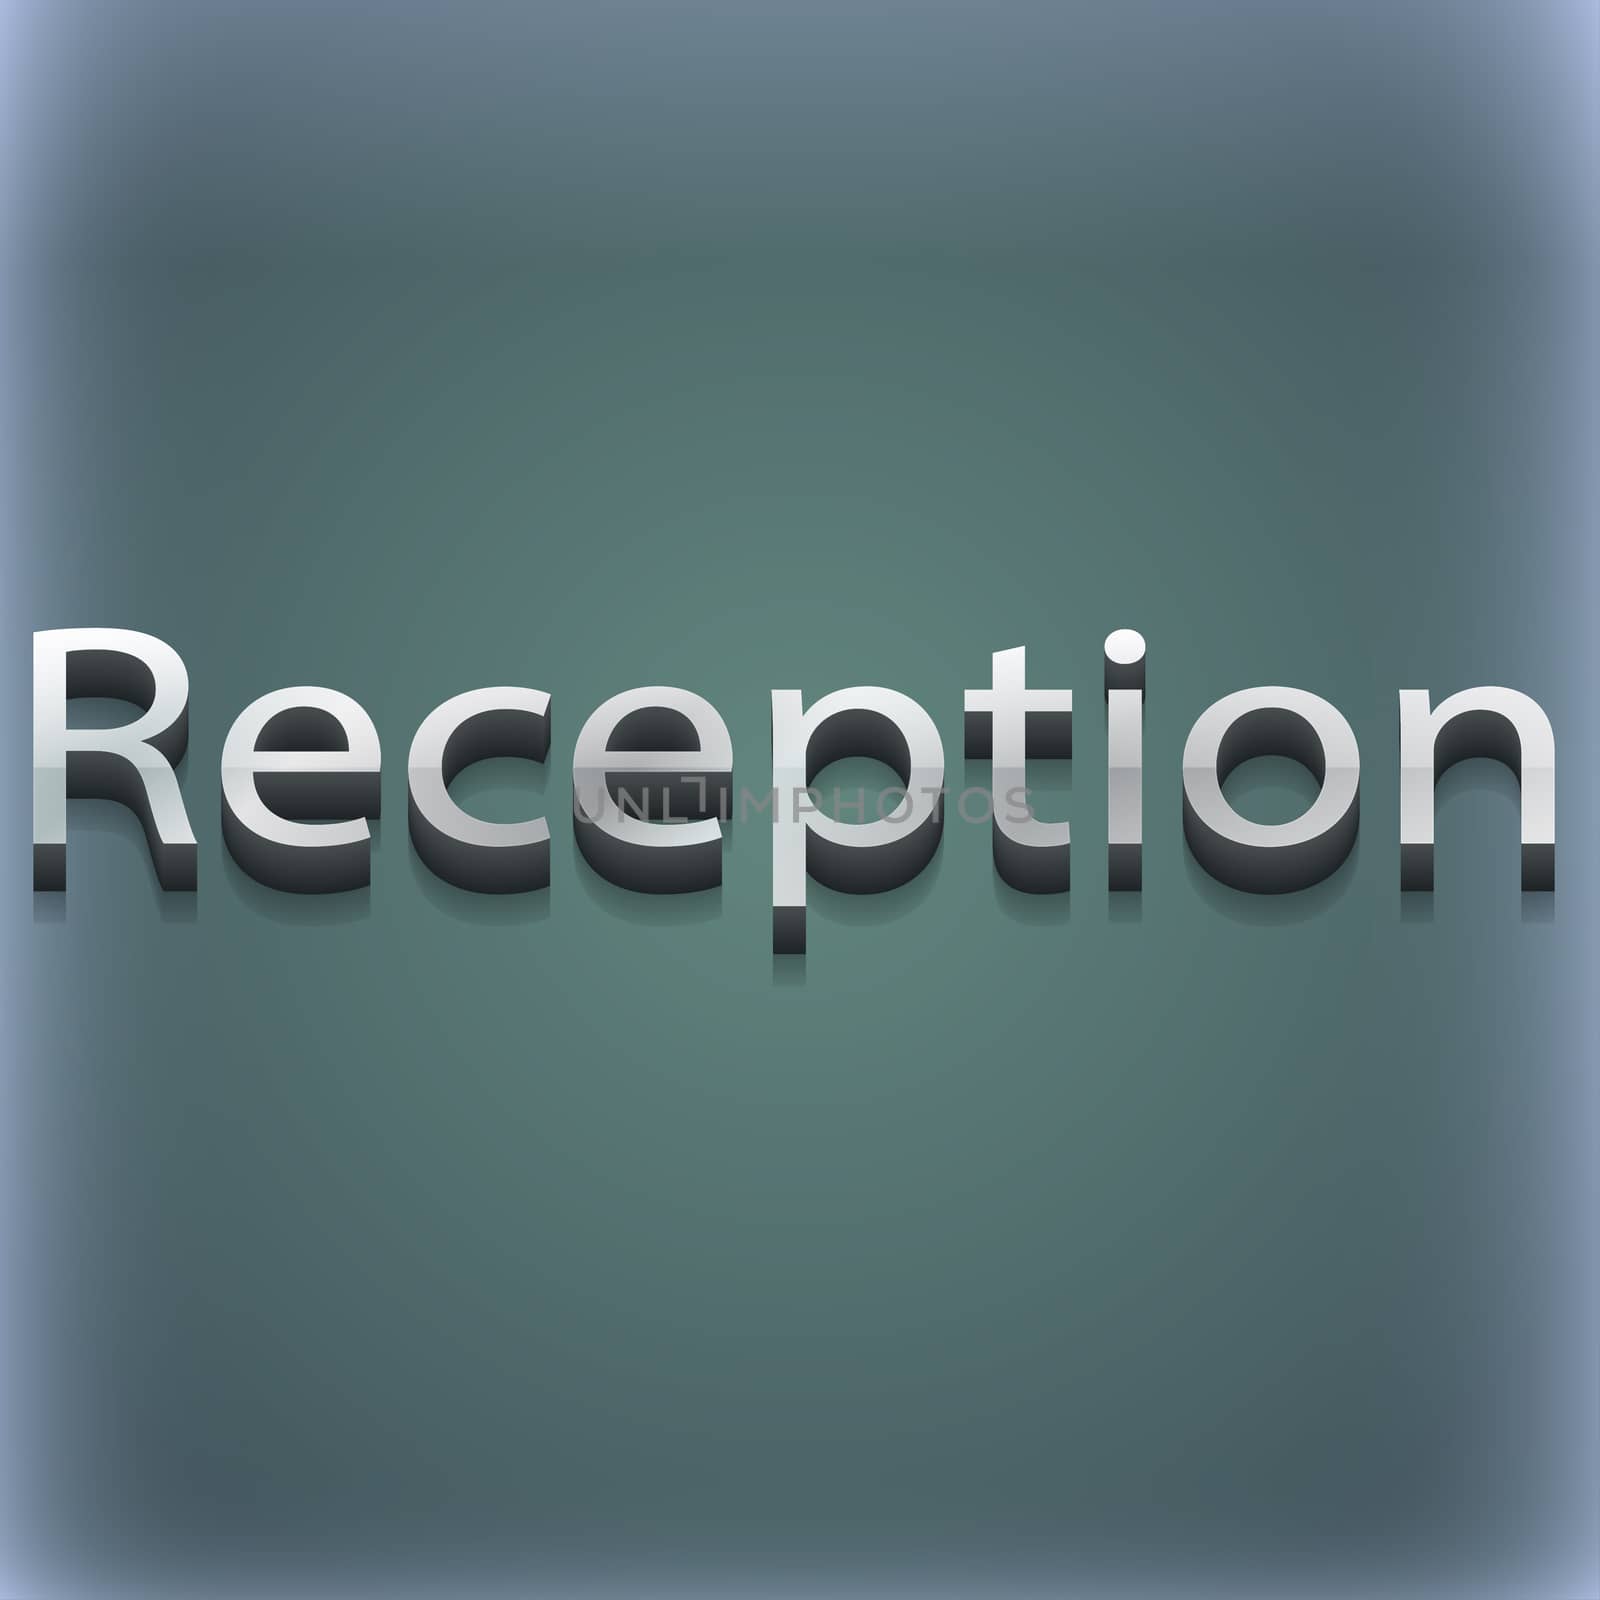 Reception icon symbol. 3D style. Trendy, modern design with space for your text illustration. Raster version